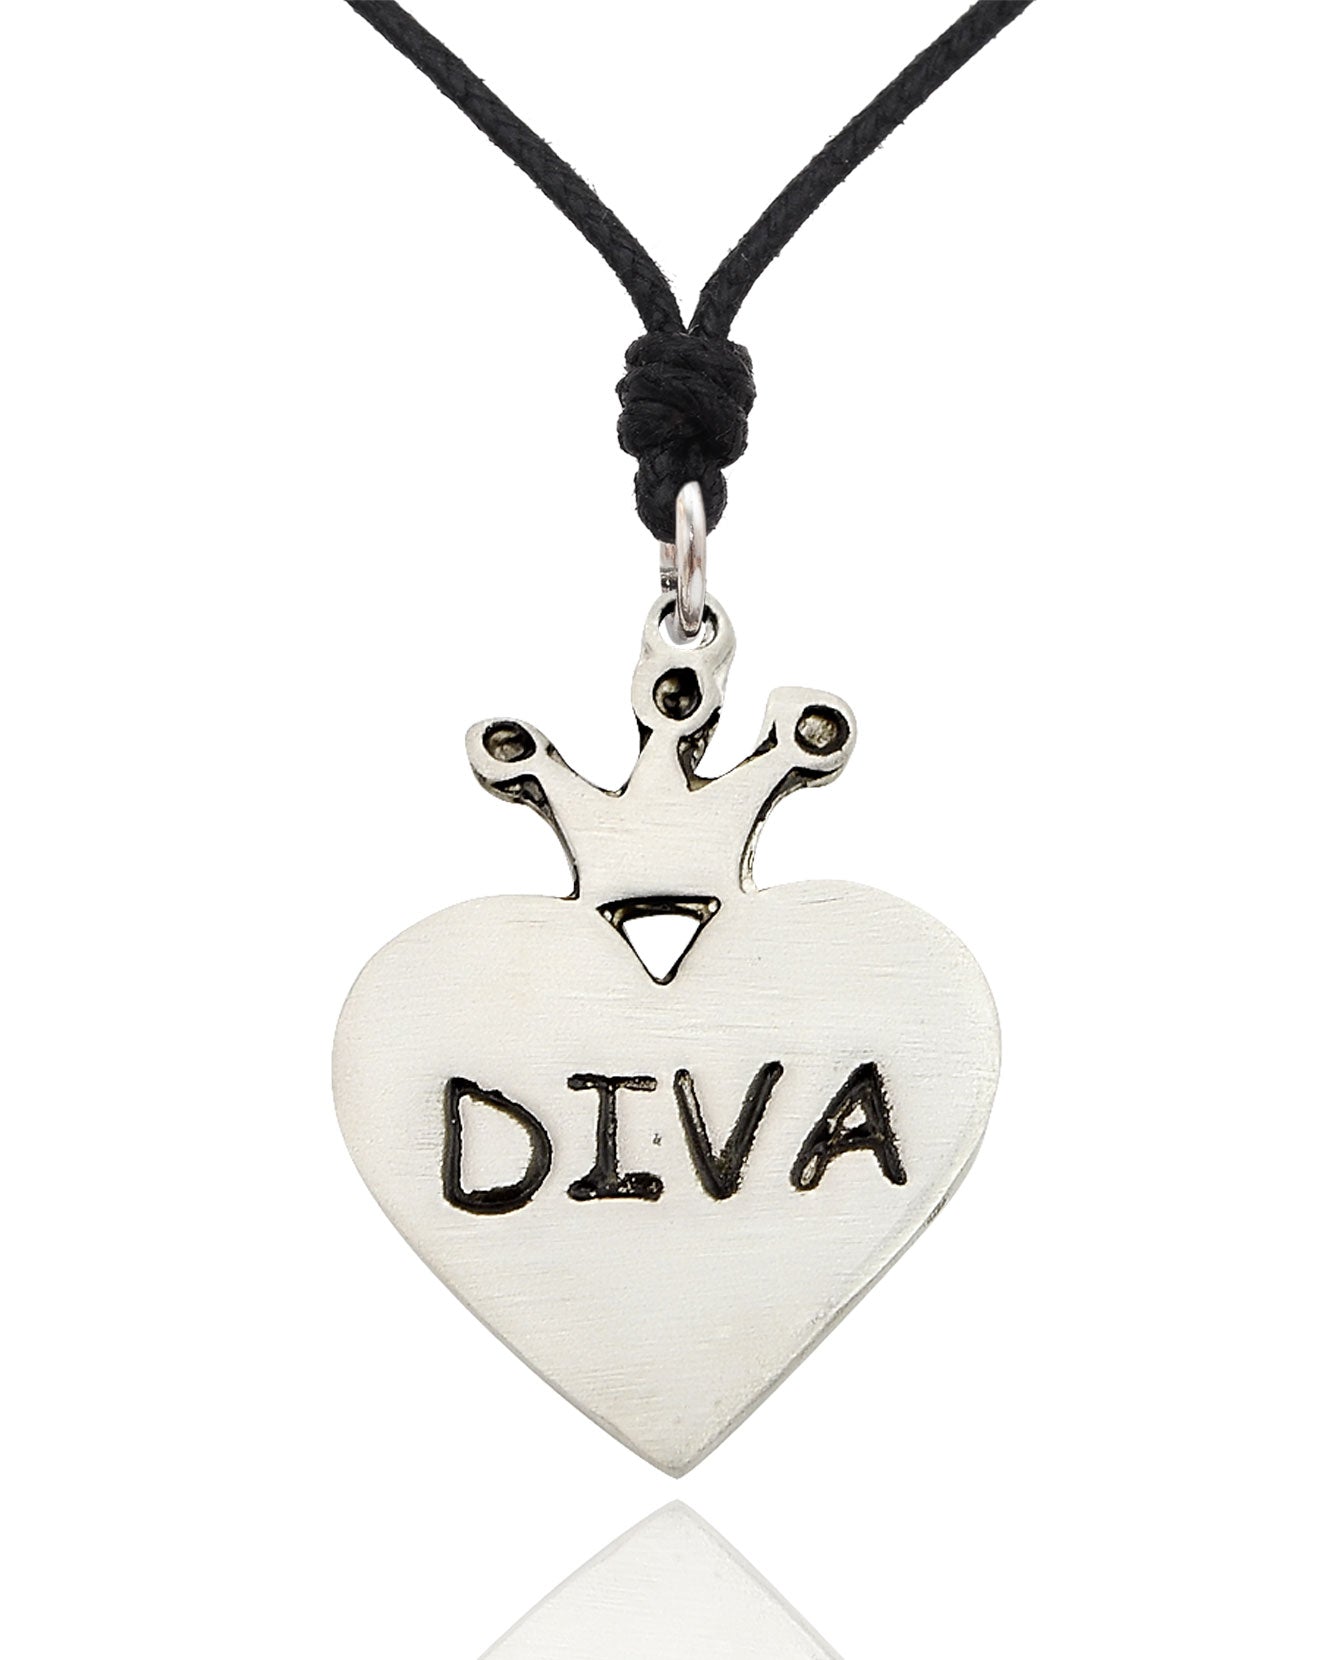 Diva Princess Heart Silver Pewter Charm Necklace Pendant Jewelry